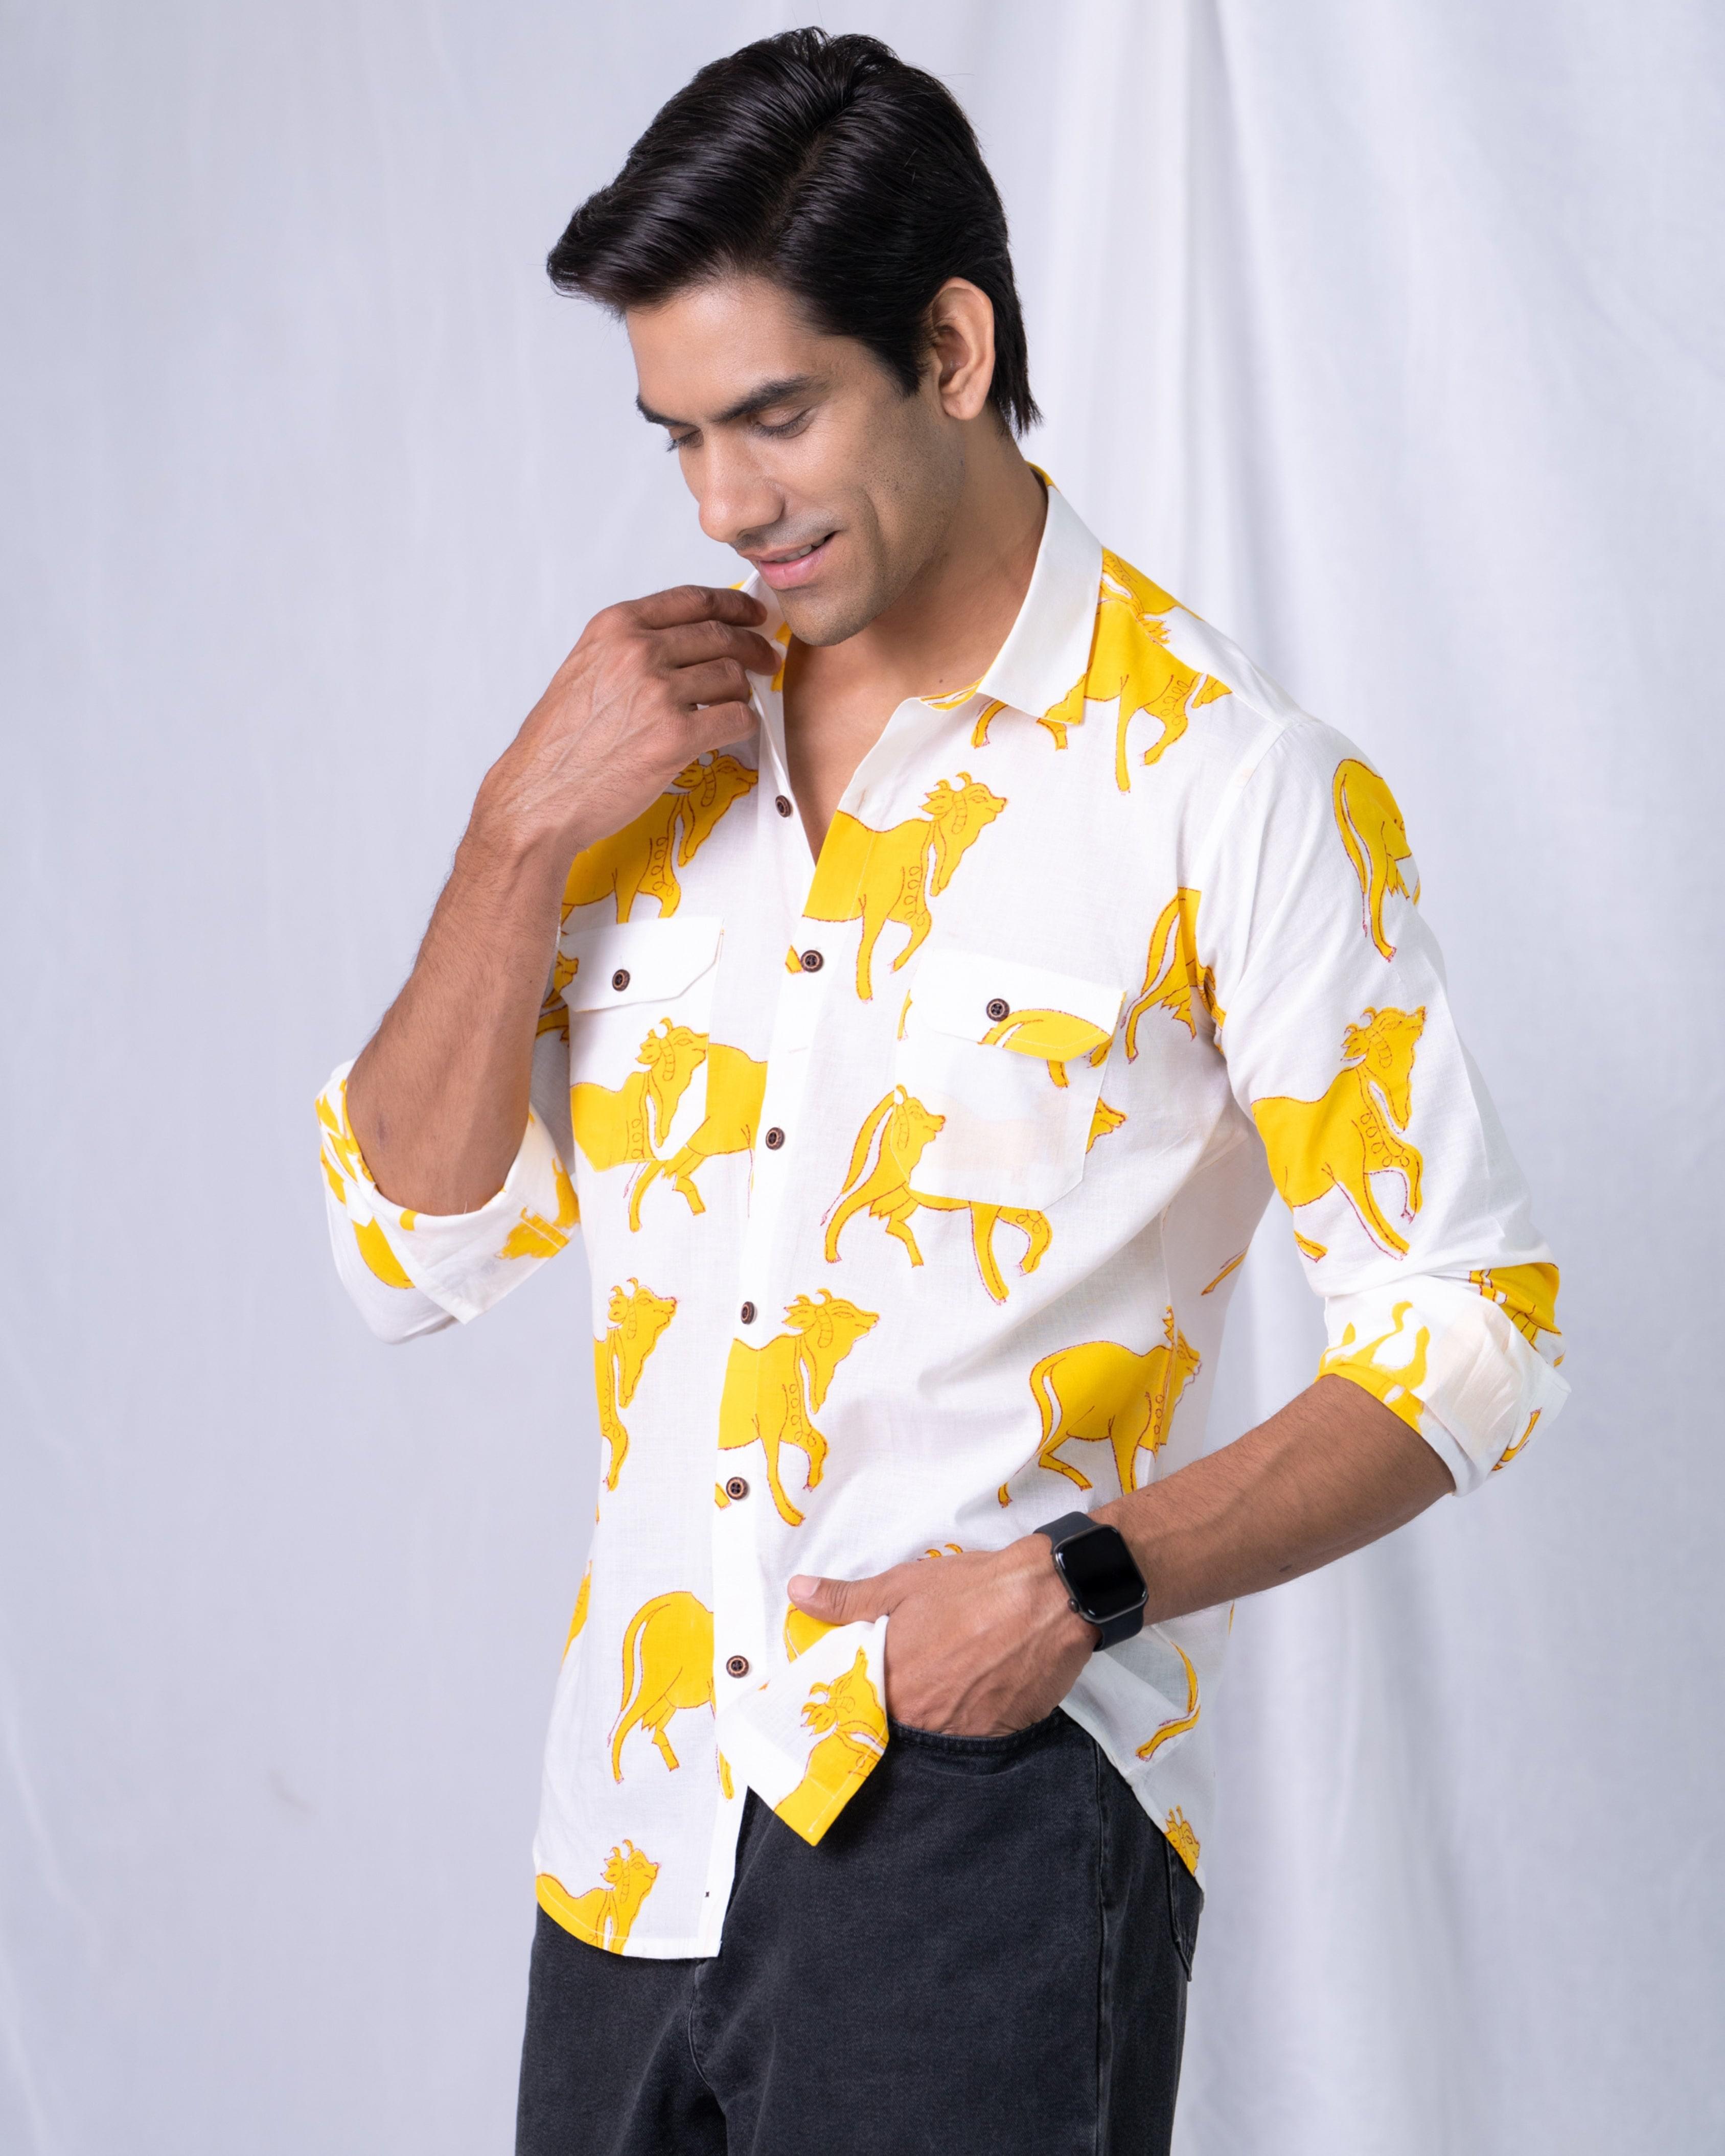 Firangi Yarn 100% Cotton Block Pichwai Cow Printed Casual Full Sleeves With Flap Pockets Men's Party Wear Shirt Yellow/White